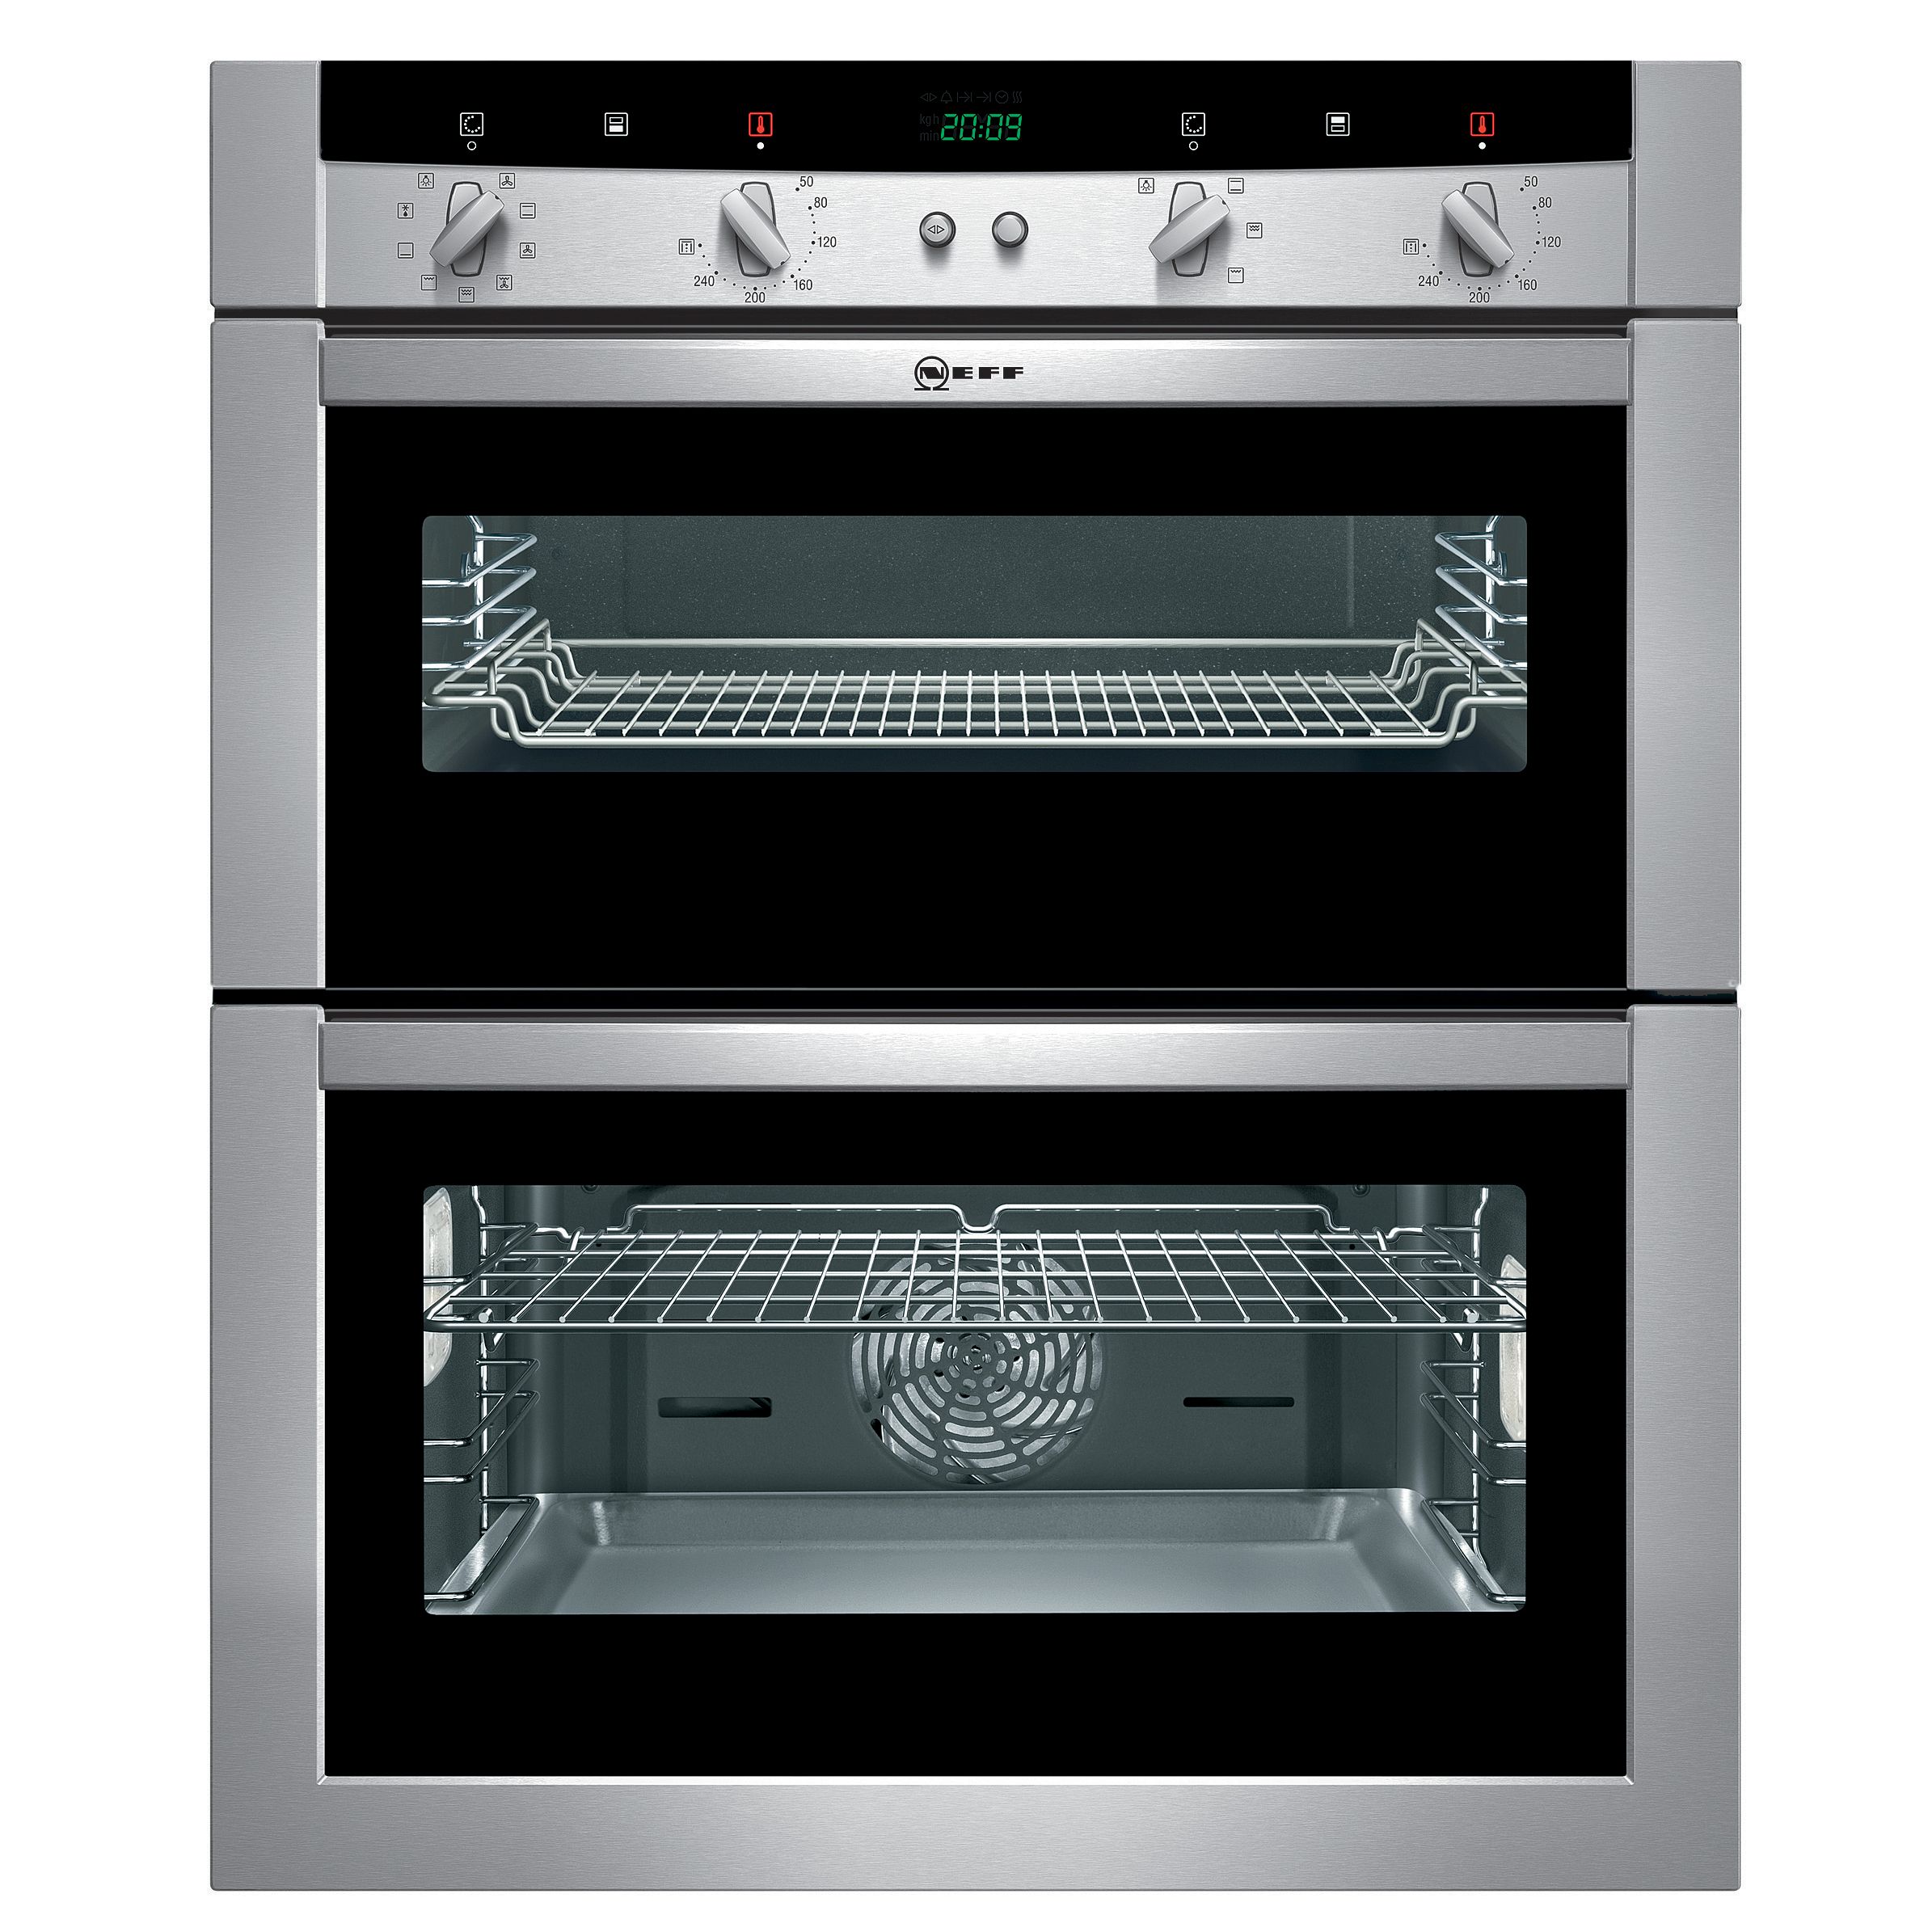 Neff U17M72N0GB Double Electric Oven, Stainless Steel at John Lewis